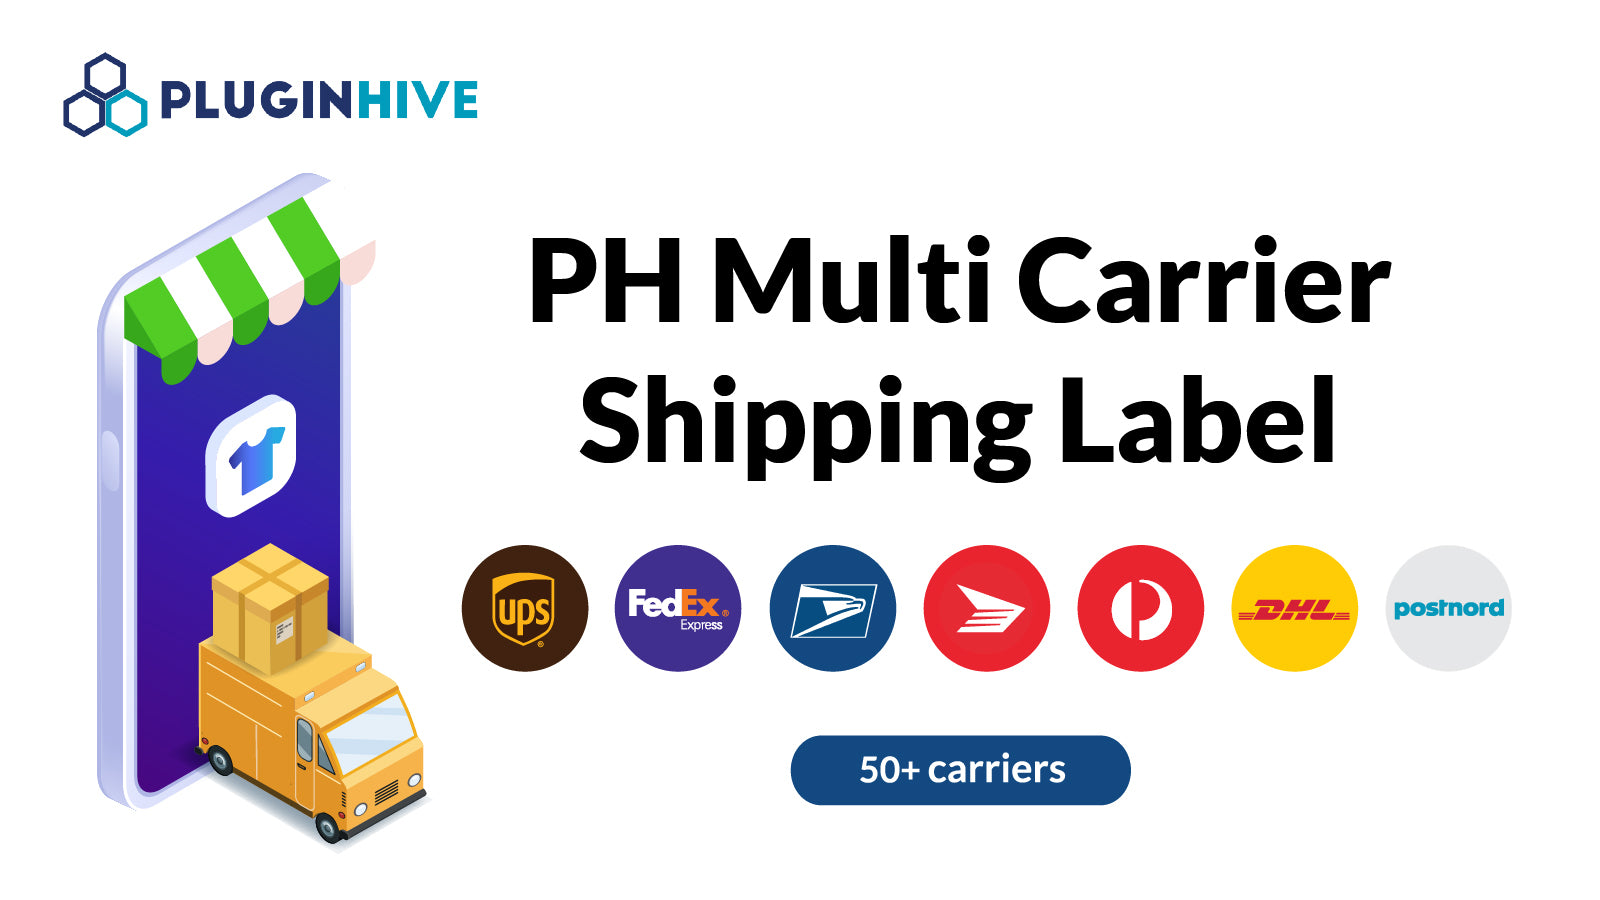 PH MultiCarrier Shipping Label - Shopify Shipping App - Multi Carrier Shipping Label | Shopify App Store